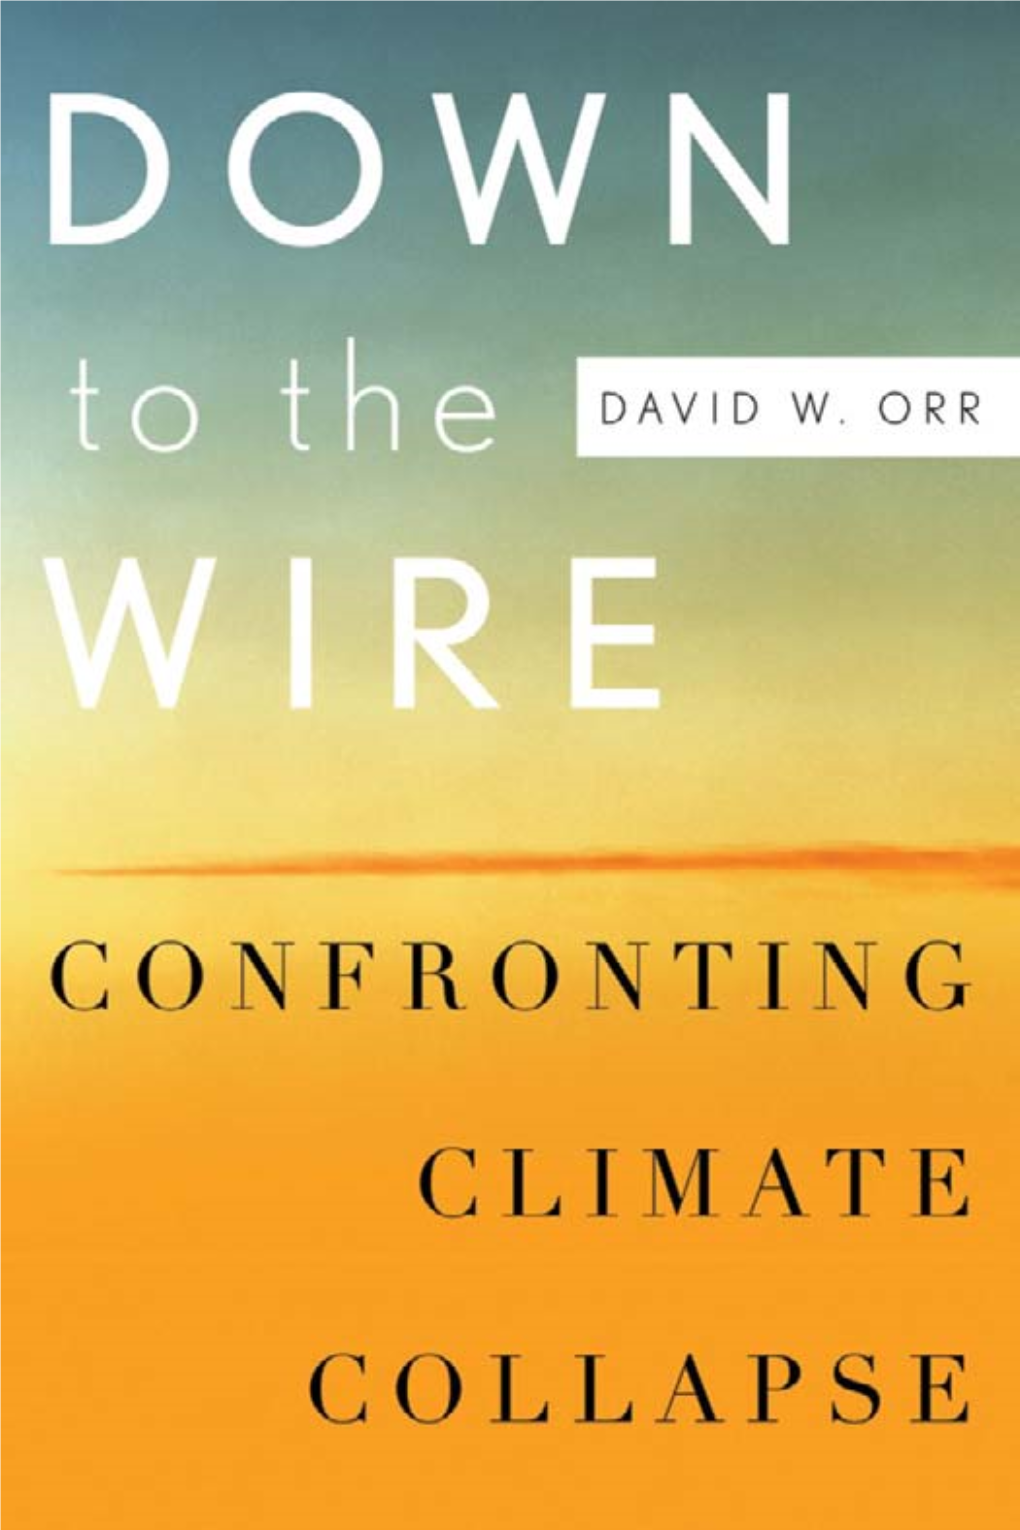 Confronting Climate Collapse / David W